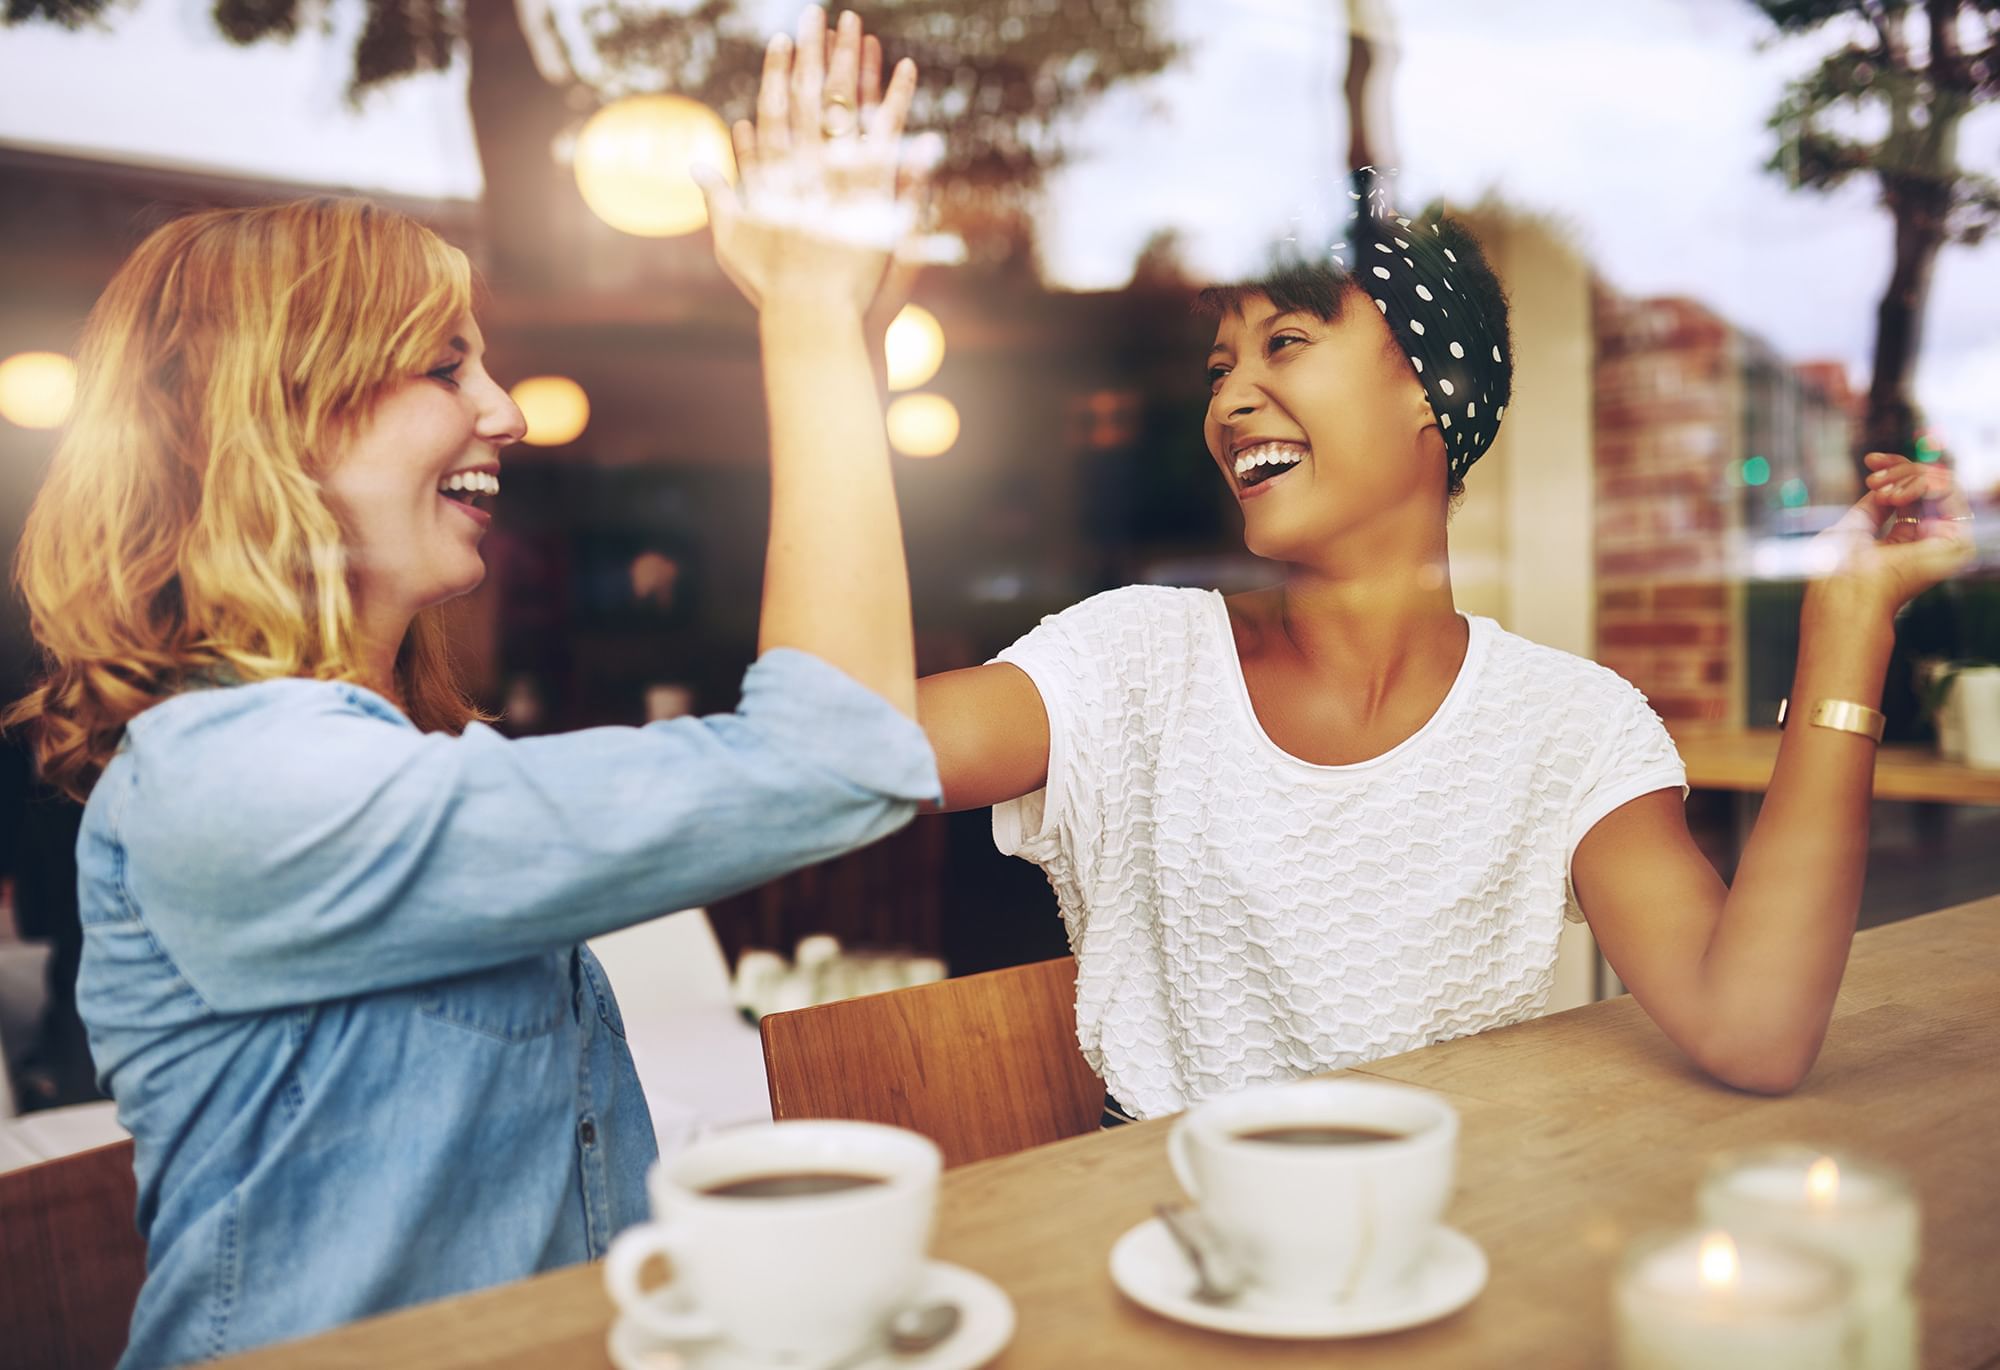 Two women high-fiving and drinking coffee at café